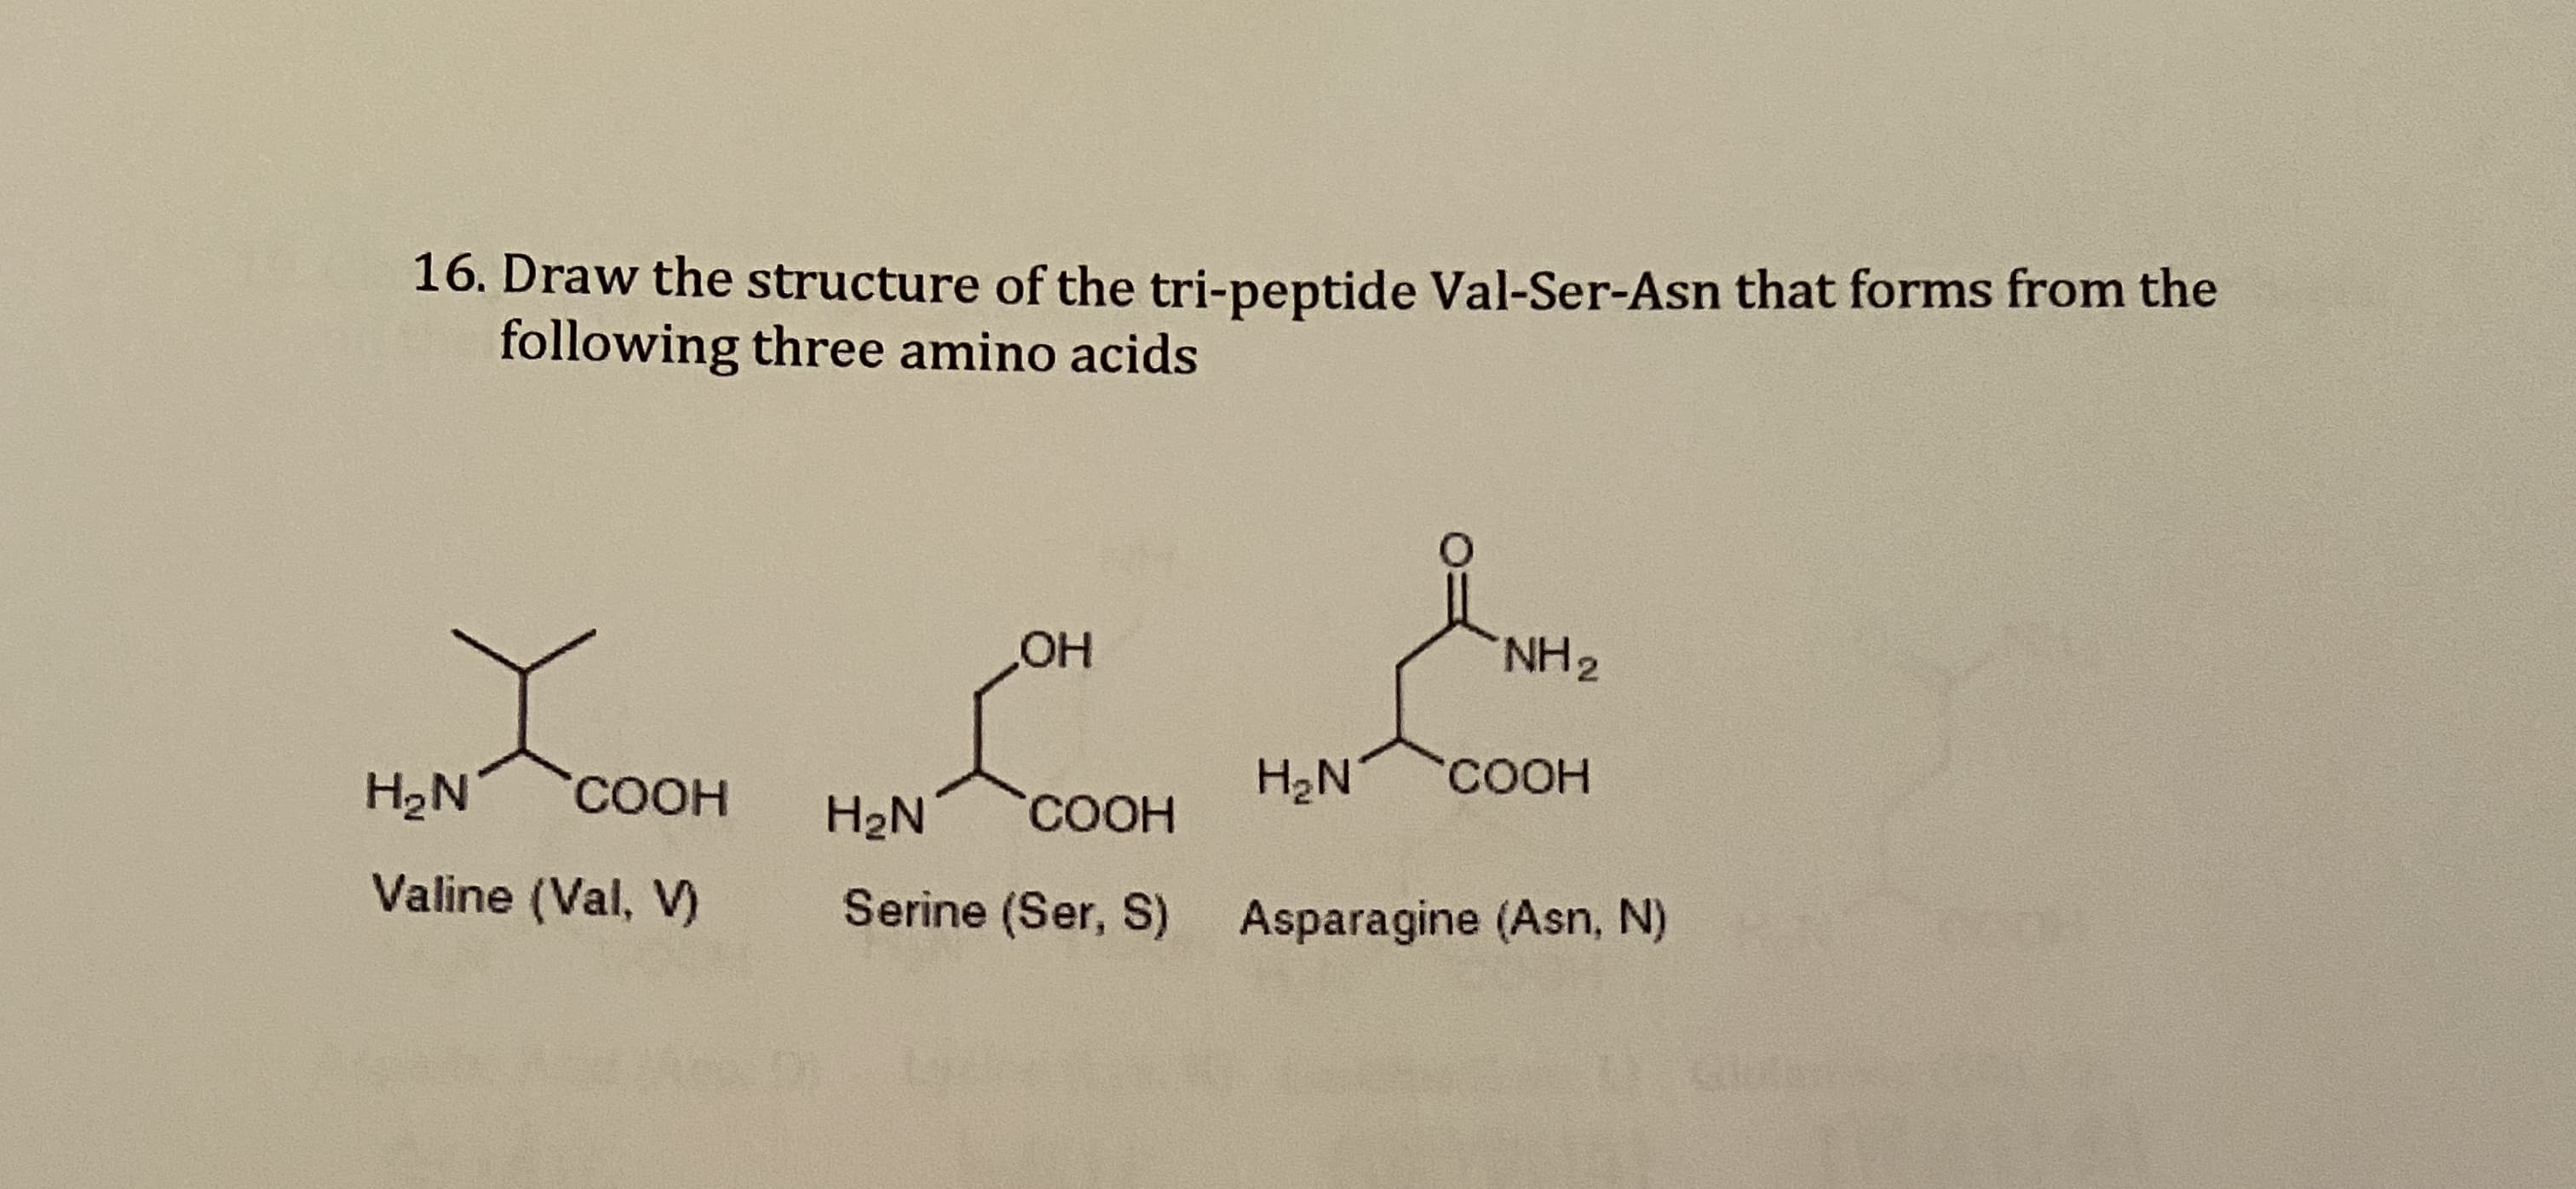 16. Draw the structure of the tri-peptide Val-Ser-Asn that forms from the
following three amino acids
NH2
H2N
COOH
H2N
COOH
H2N
COOH
Valine (Val, V)
Serine (Ser, S) Asparagine (Asn, N)
